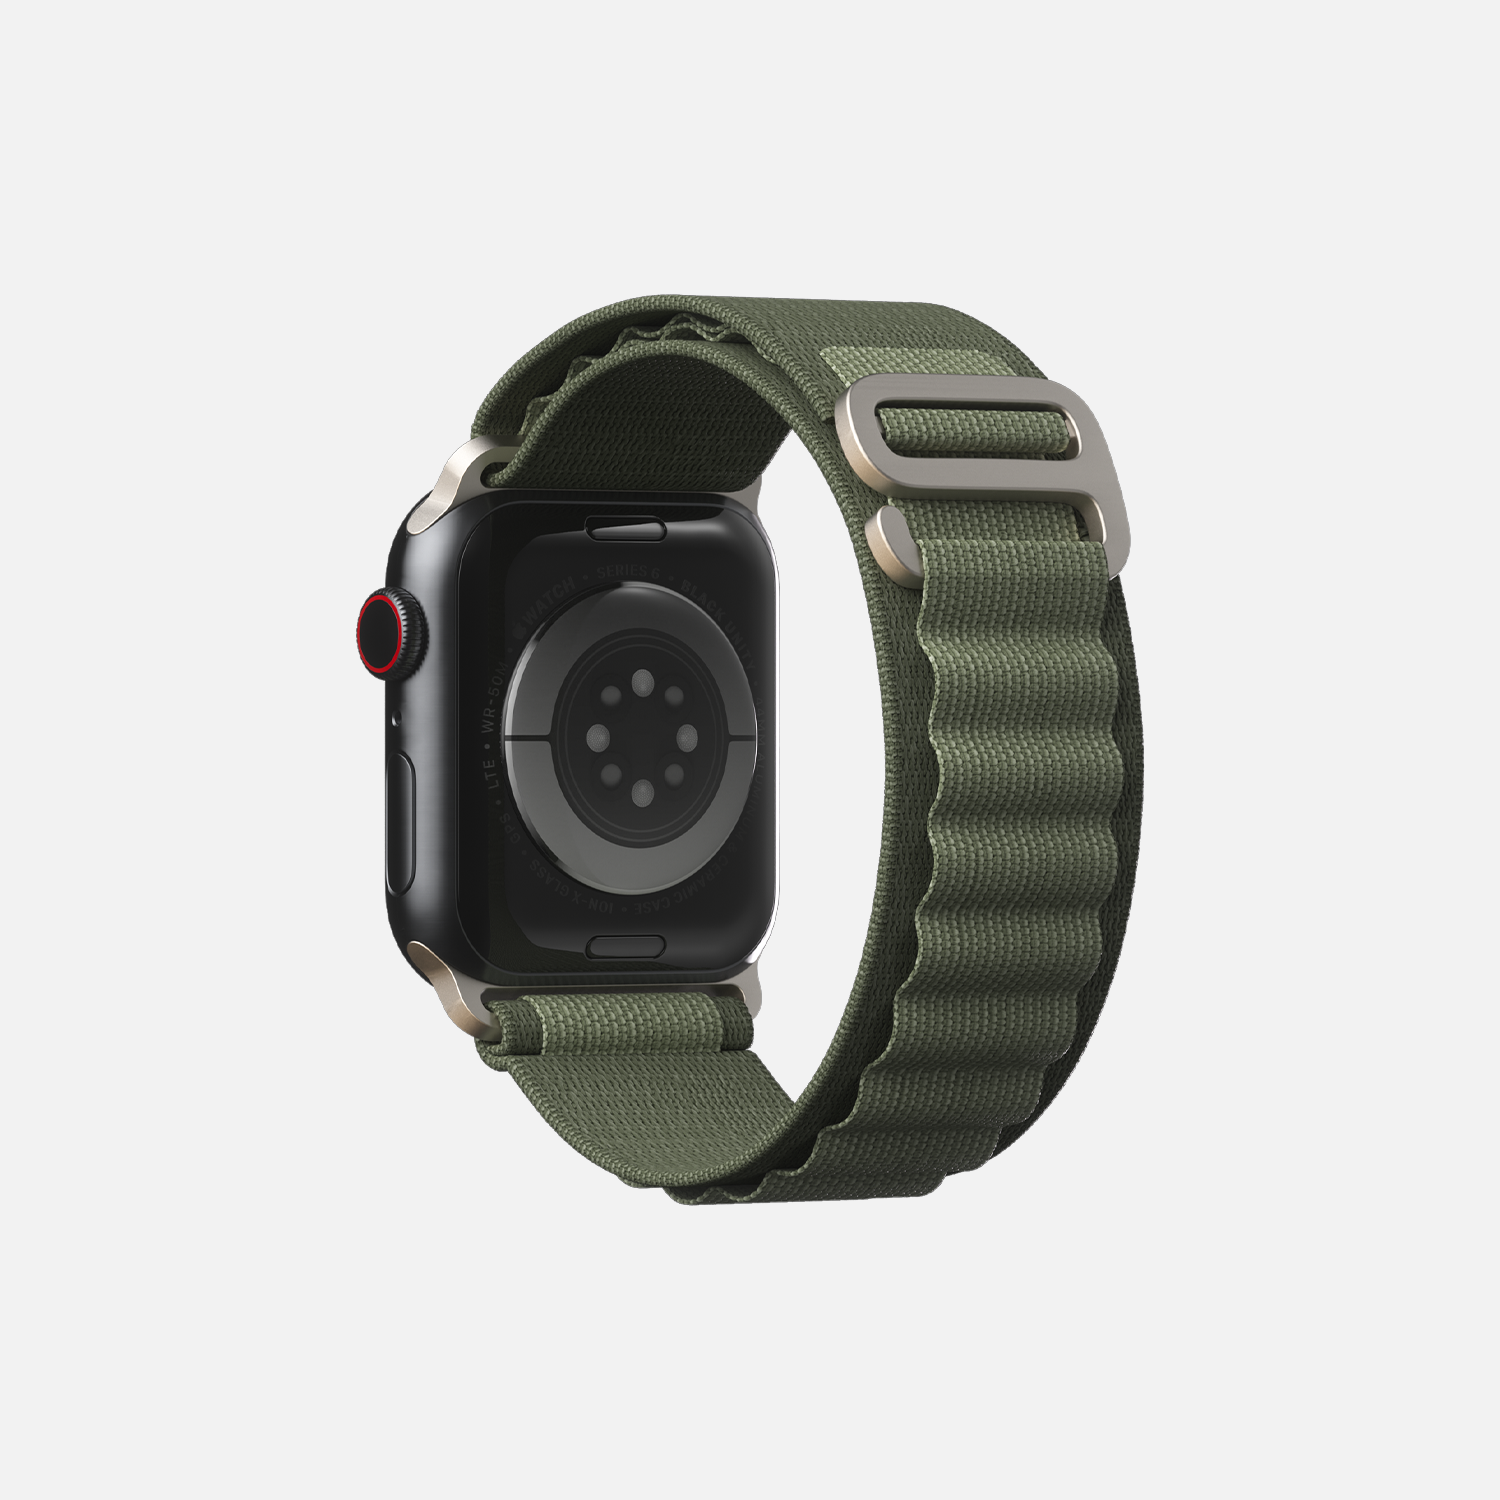 Rear view of a smartwatch with sage green woven strap, black casing, and red digital crown on white background.